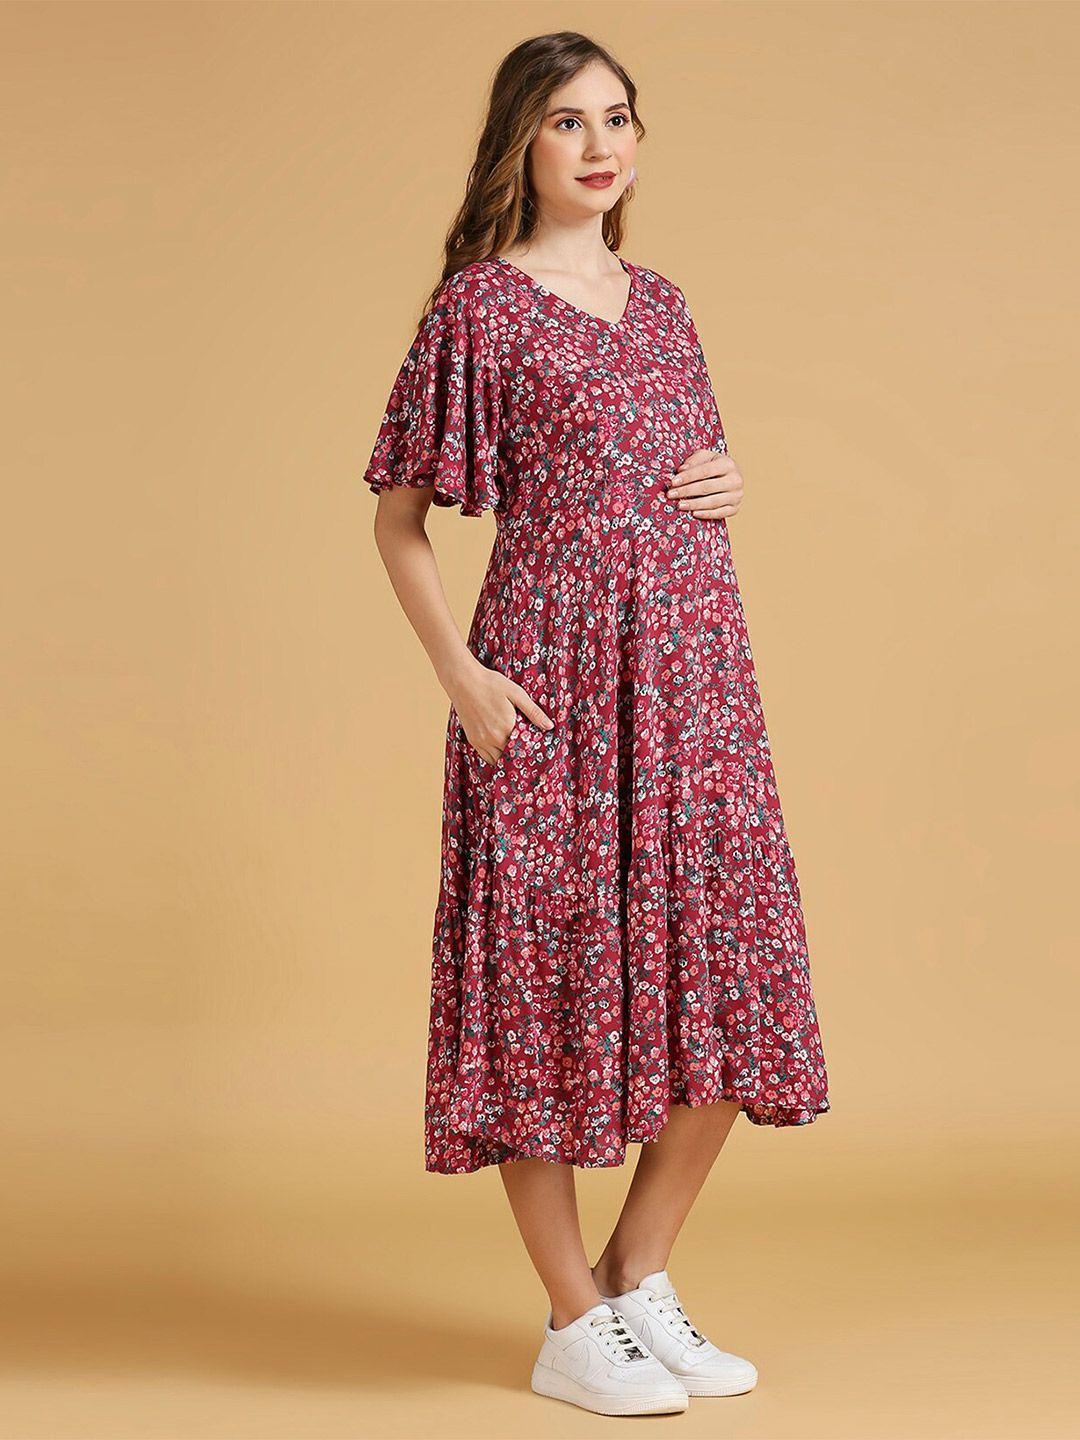 momtobe floral print maternity fit & flare dress